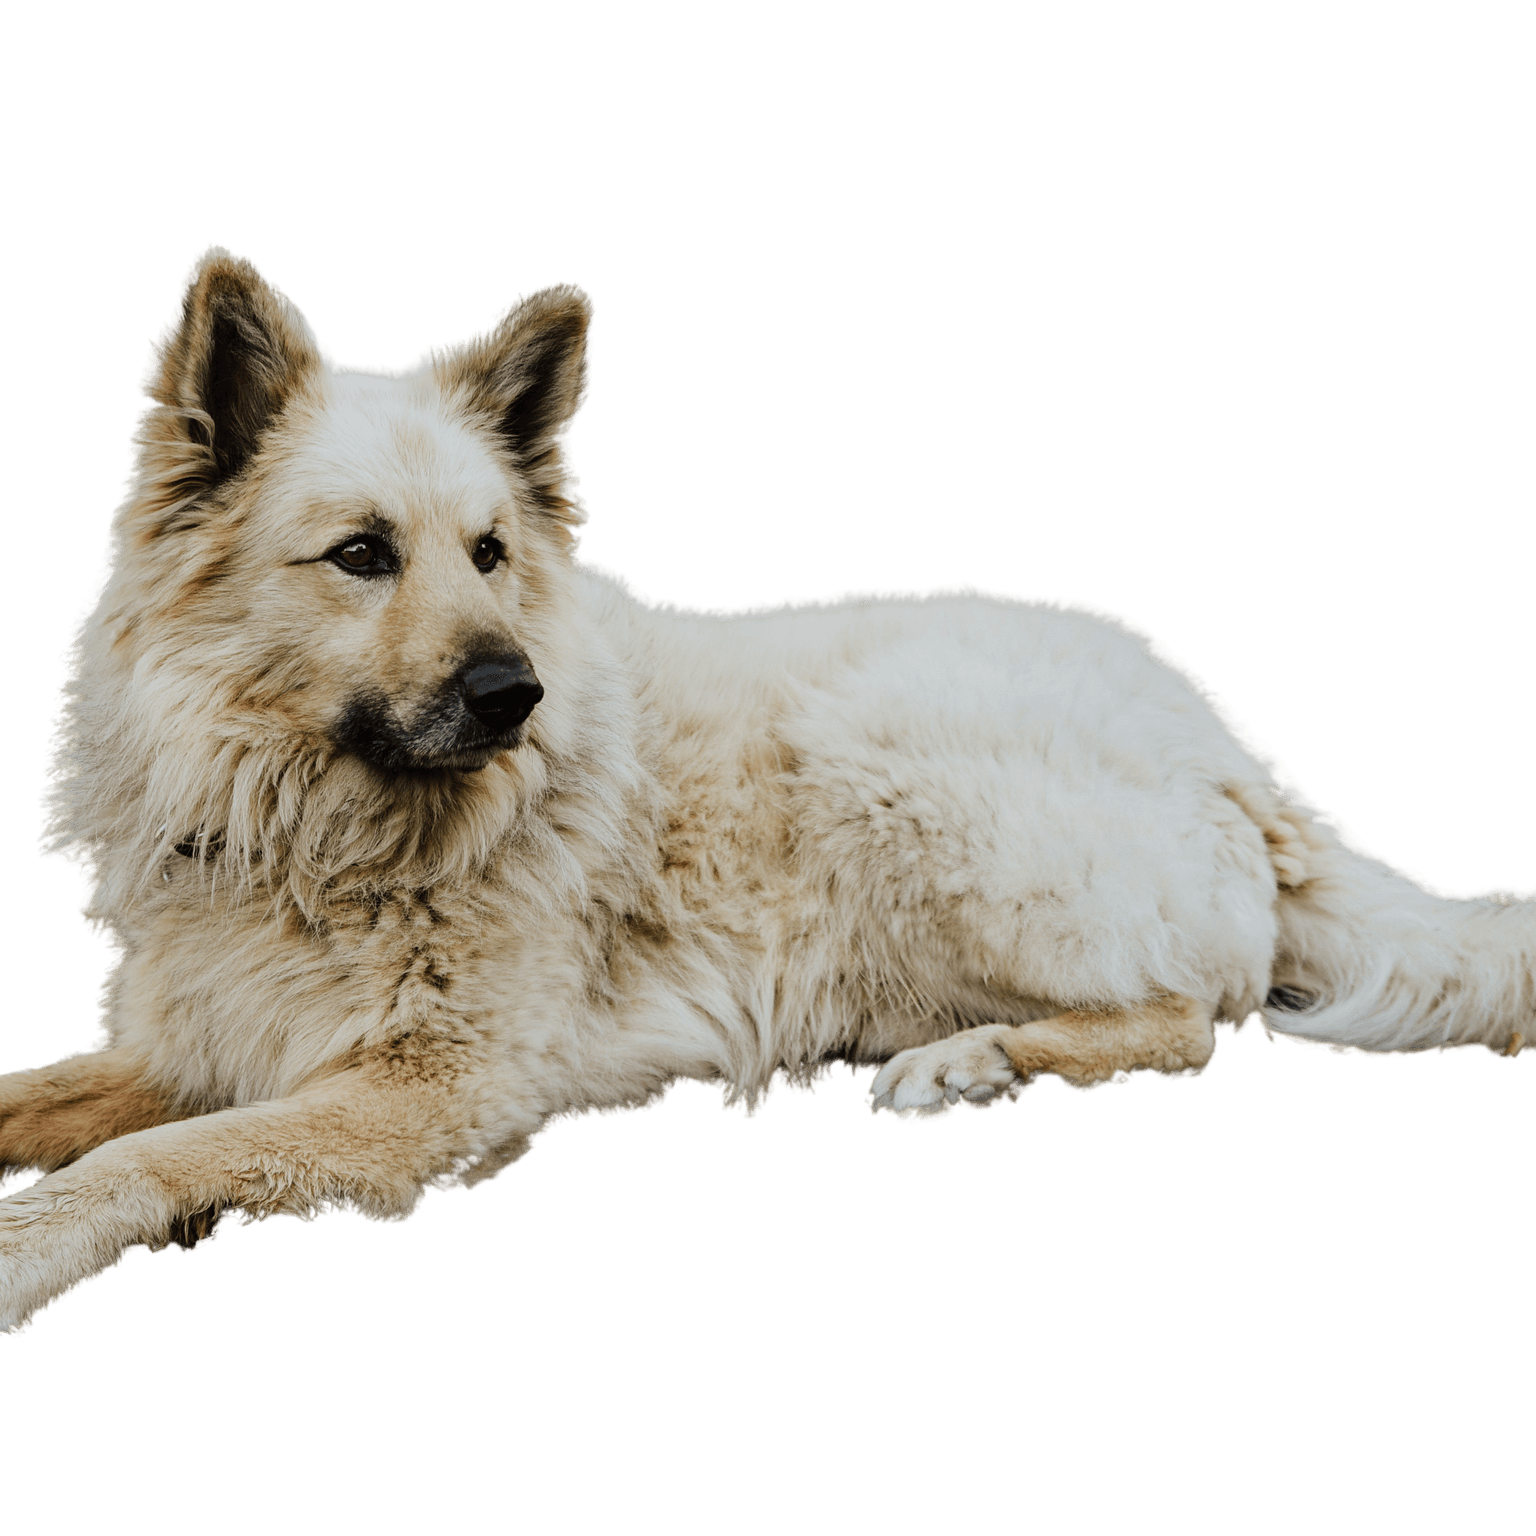 Perro Pastor Garafiano breed description and character description of the blond dog from La Palma, Canary Islands dog, dog from Spain, dog that resembles Border Collie, blond dog breed, red dog breed, dog with standing ears, dog that looks like German Shepherd, German Shepherd similar breed